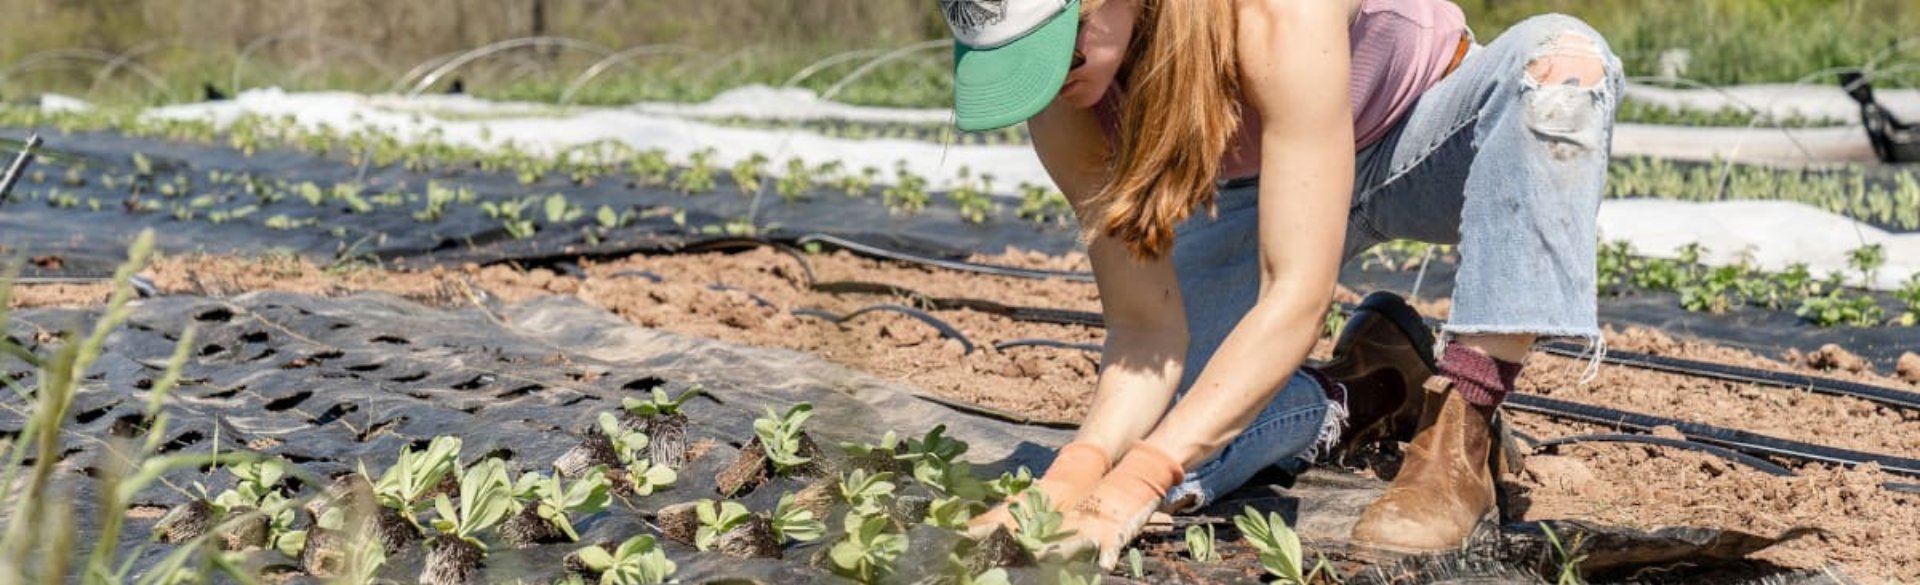 Person wearing hat working in planted field